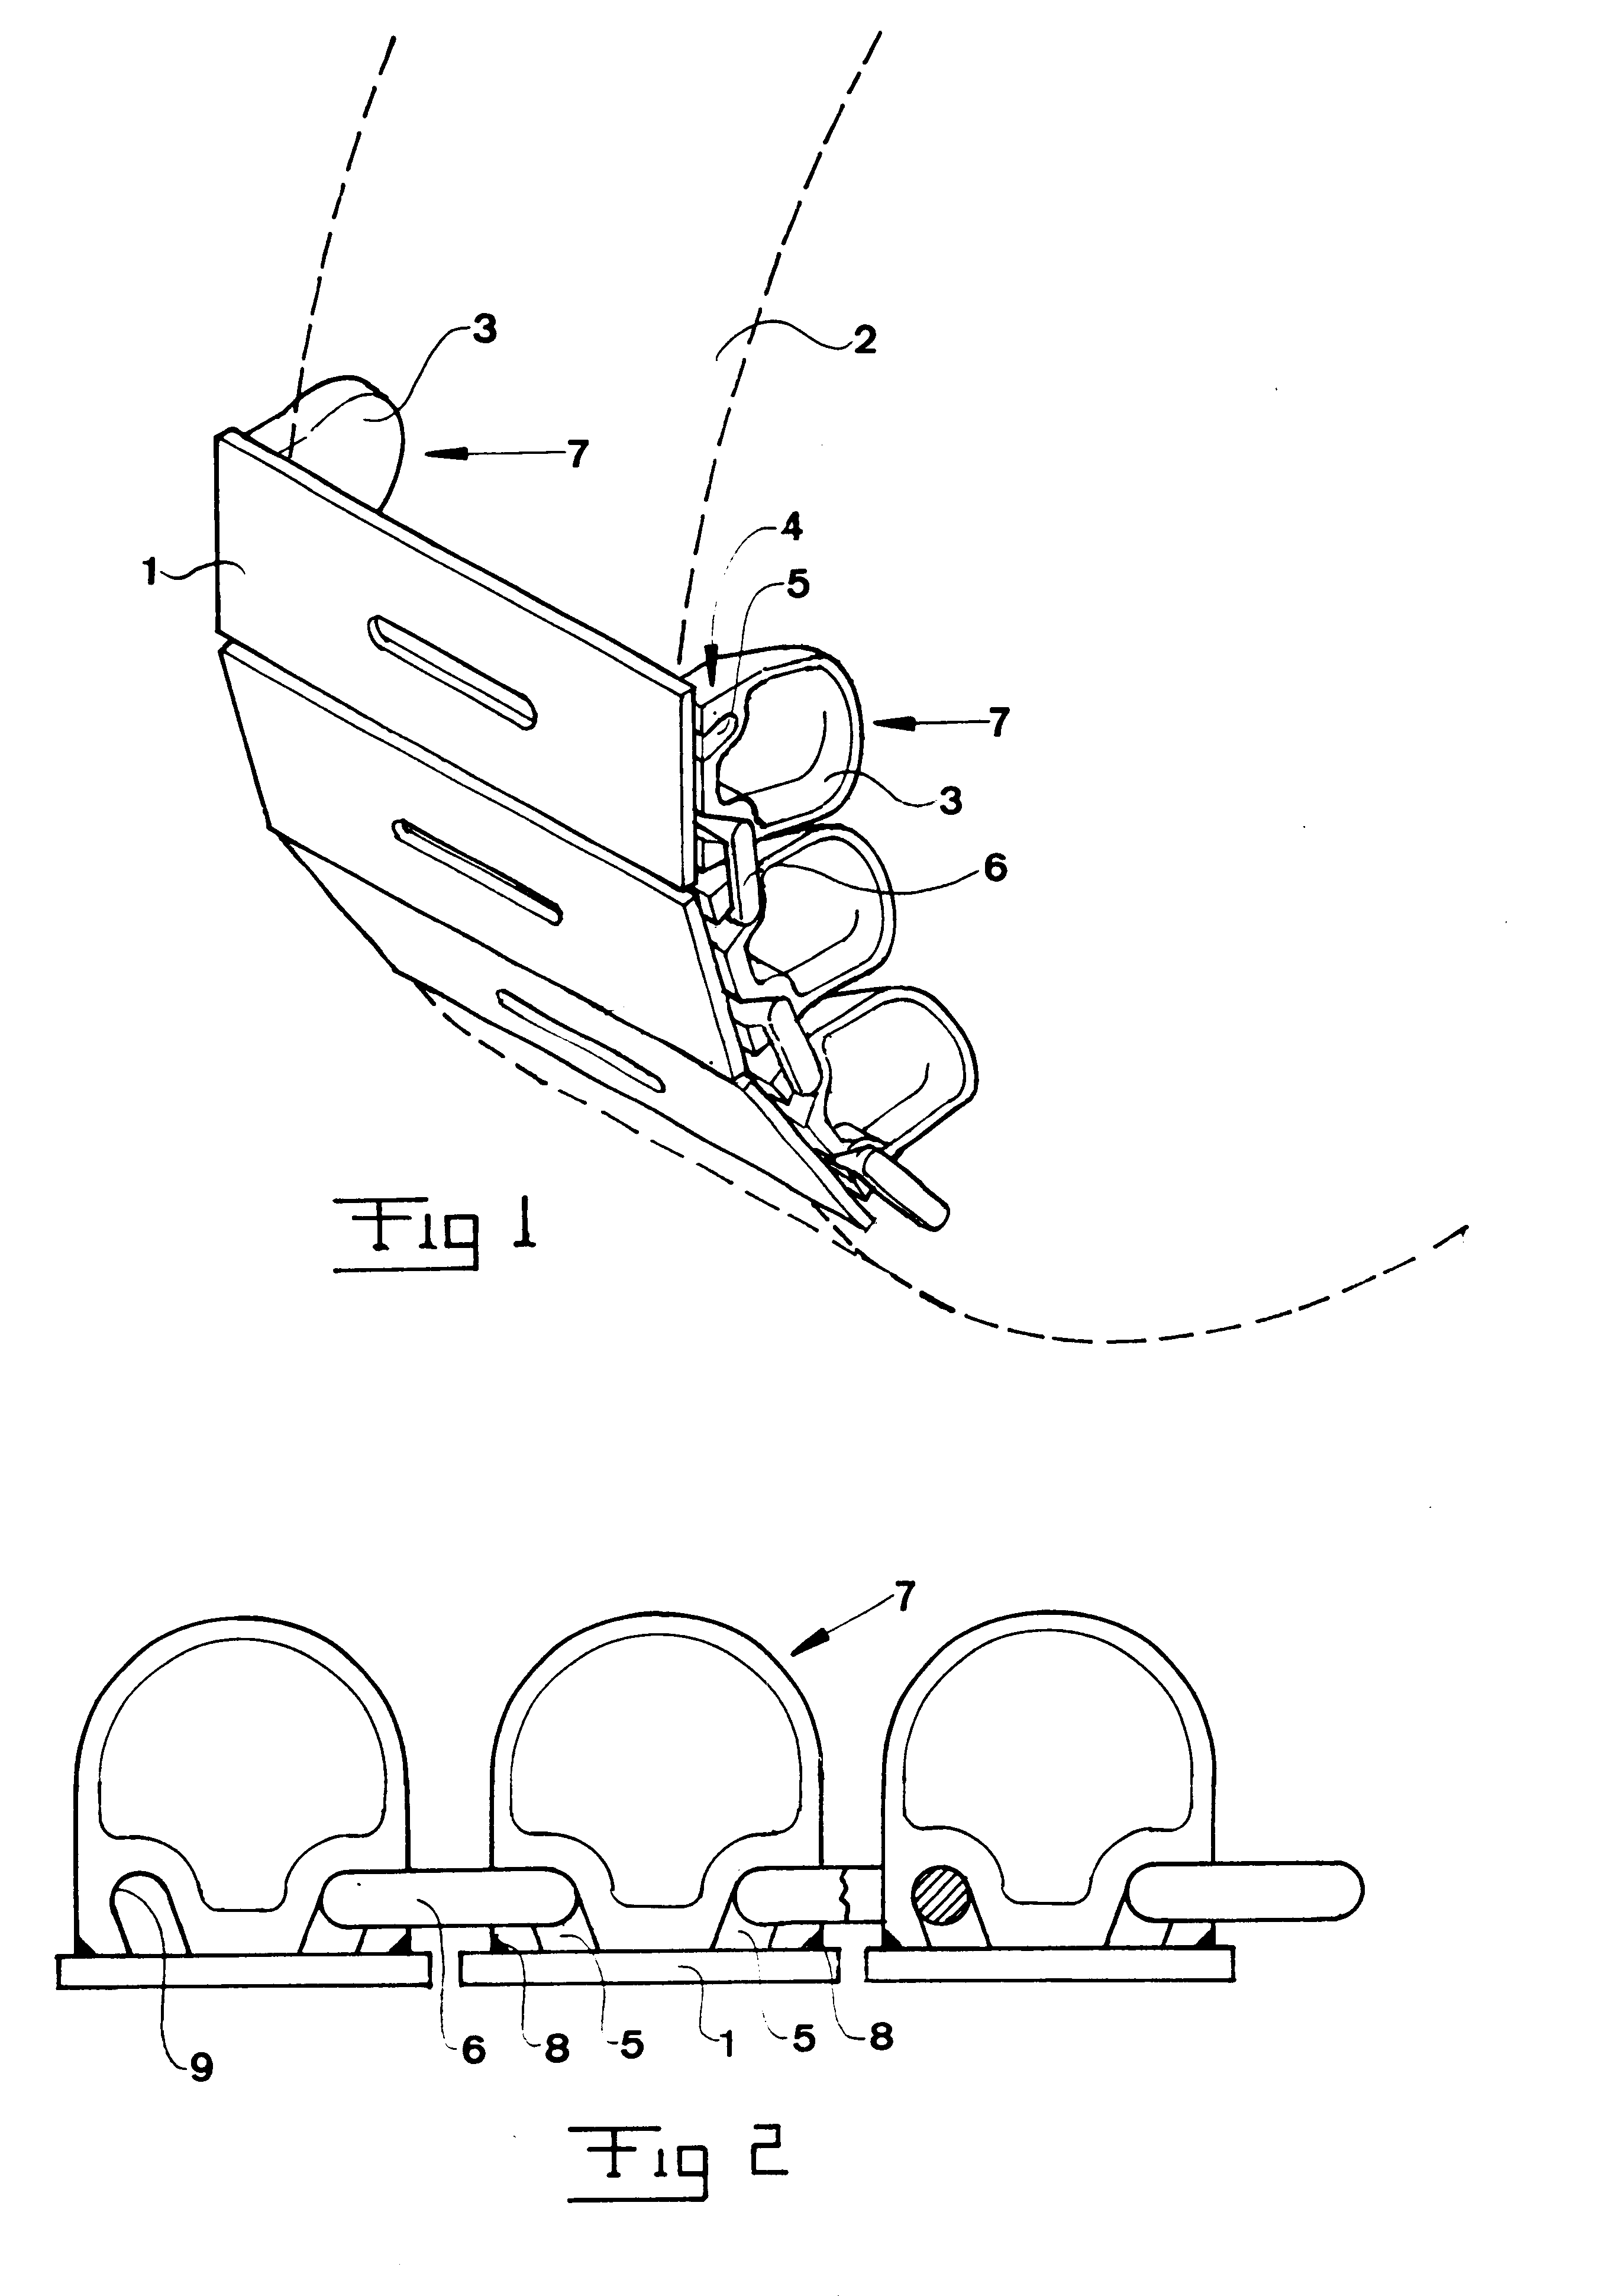 Band device for vehicle wheels